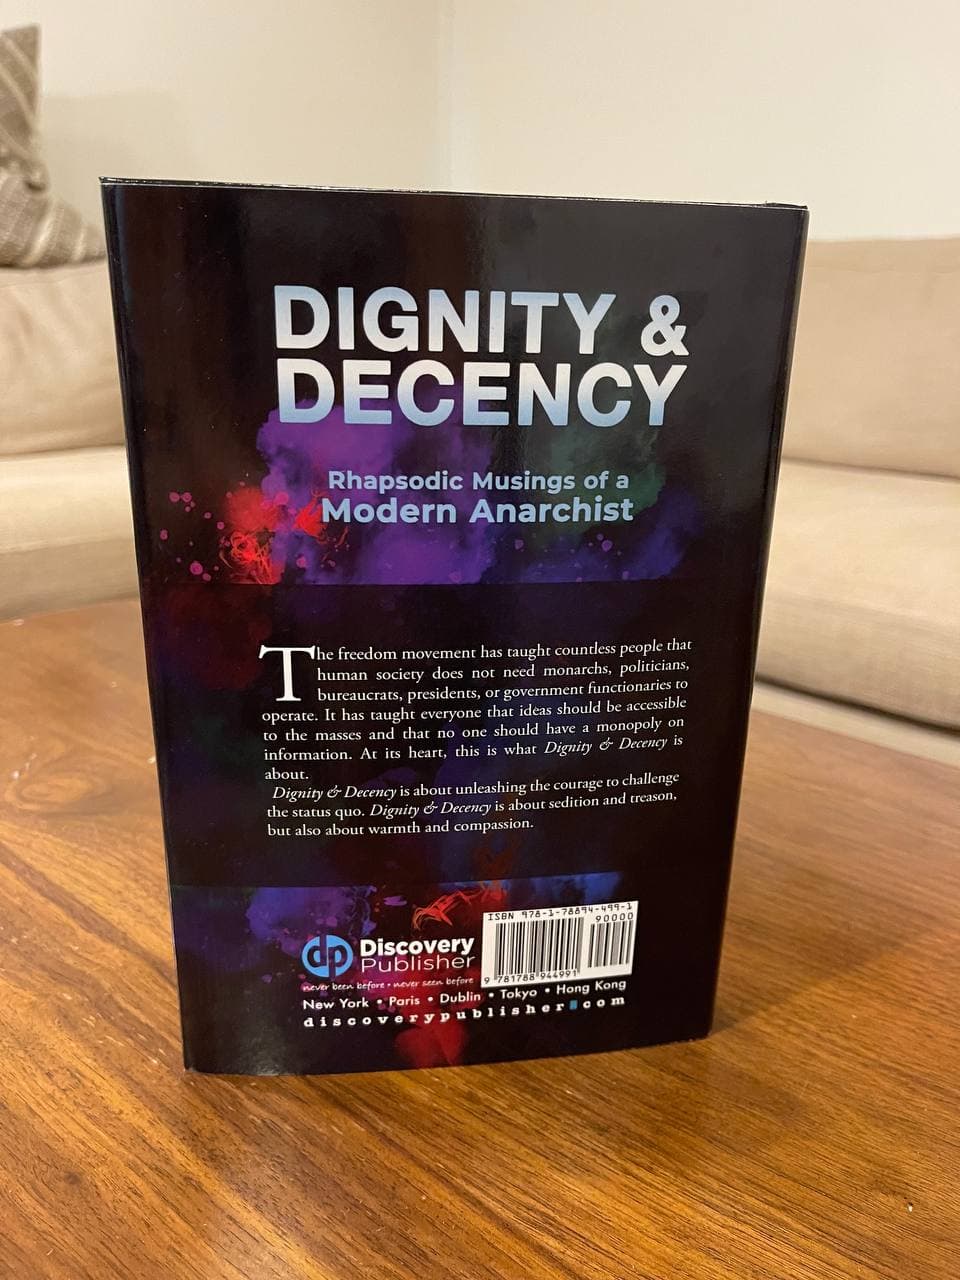 Sterlin Lujan with Book Dignity and Decency